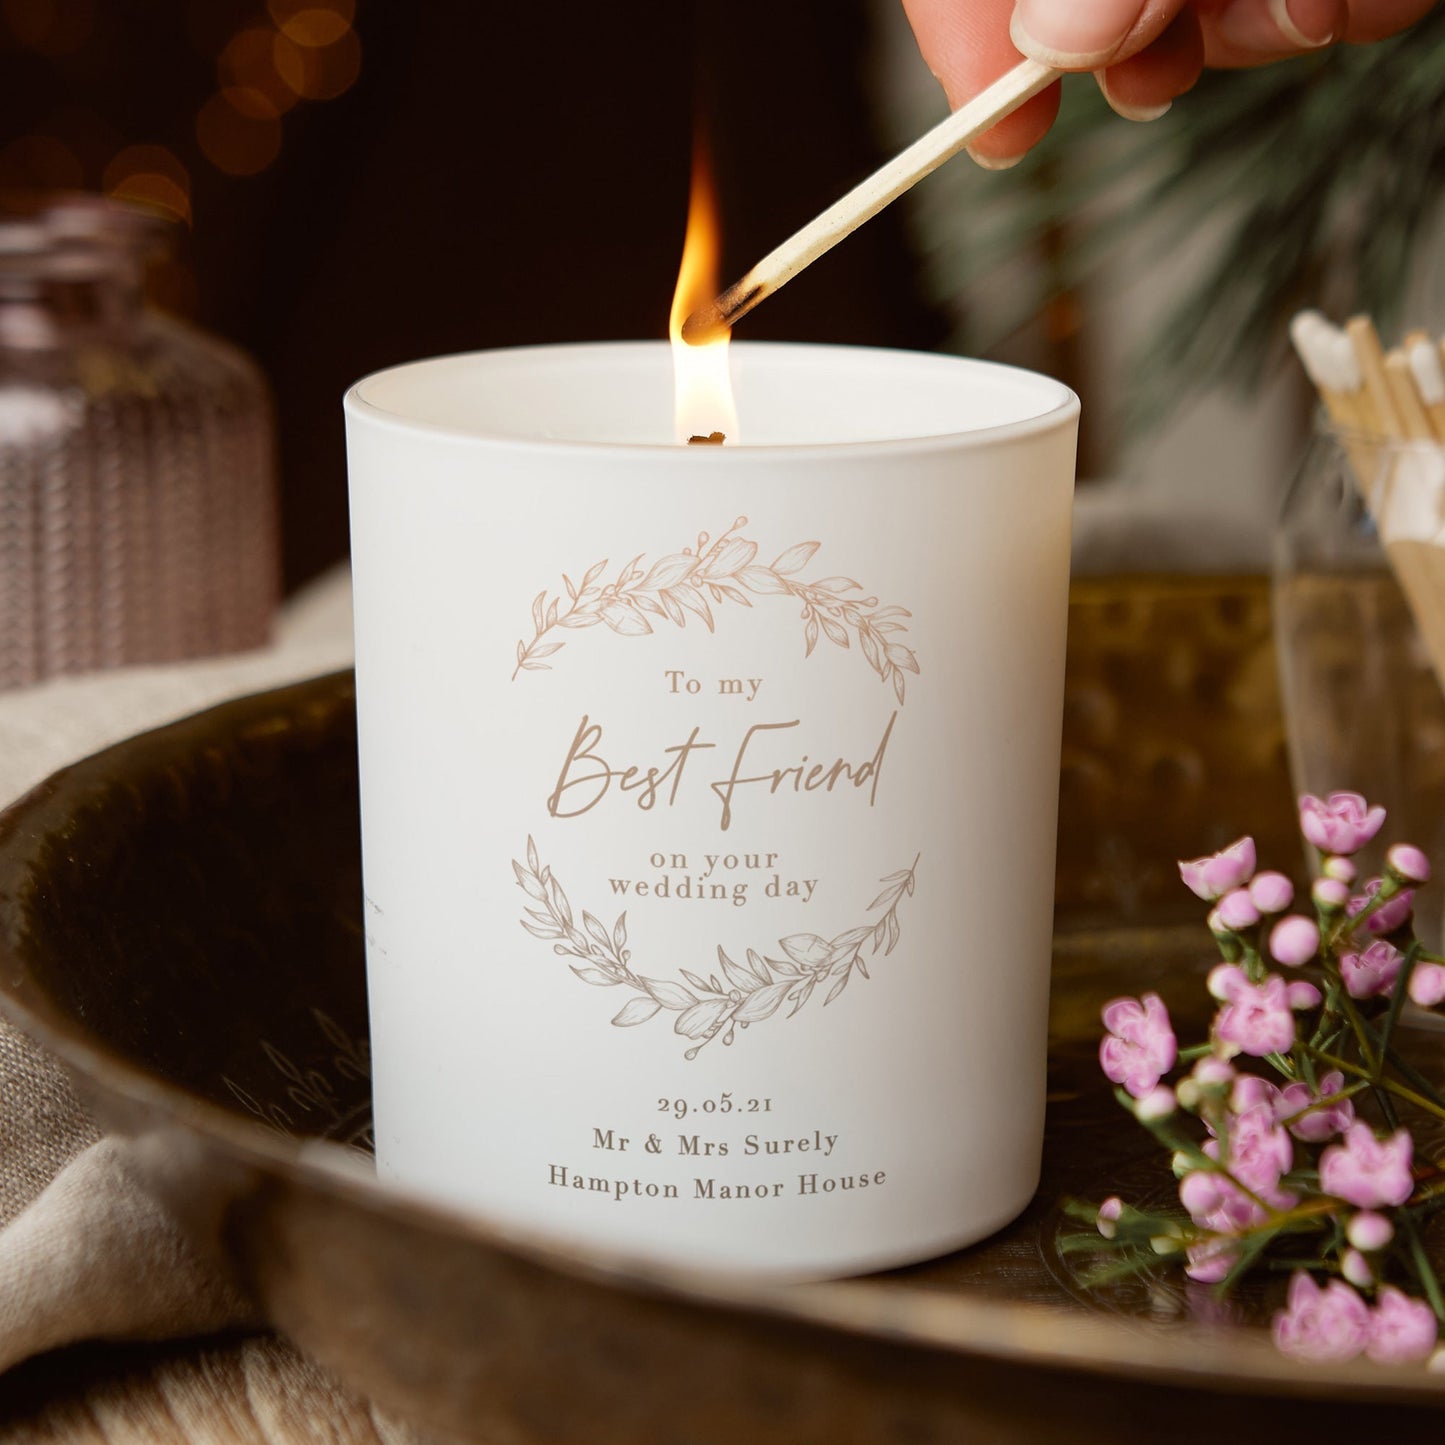 Best Friend Wedding Gift White Candle - Kindred Fires